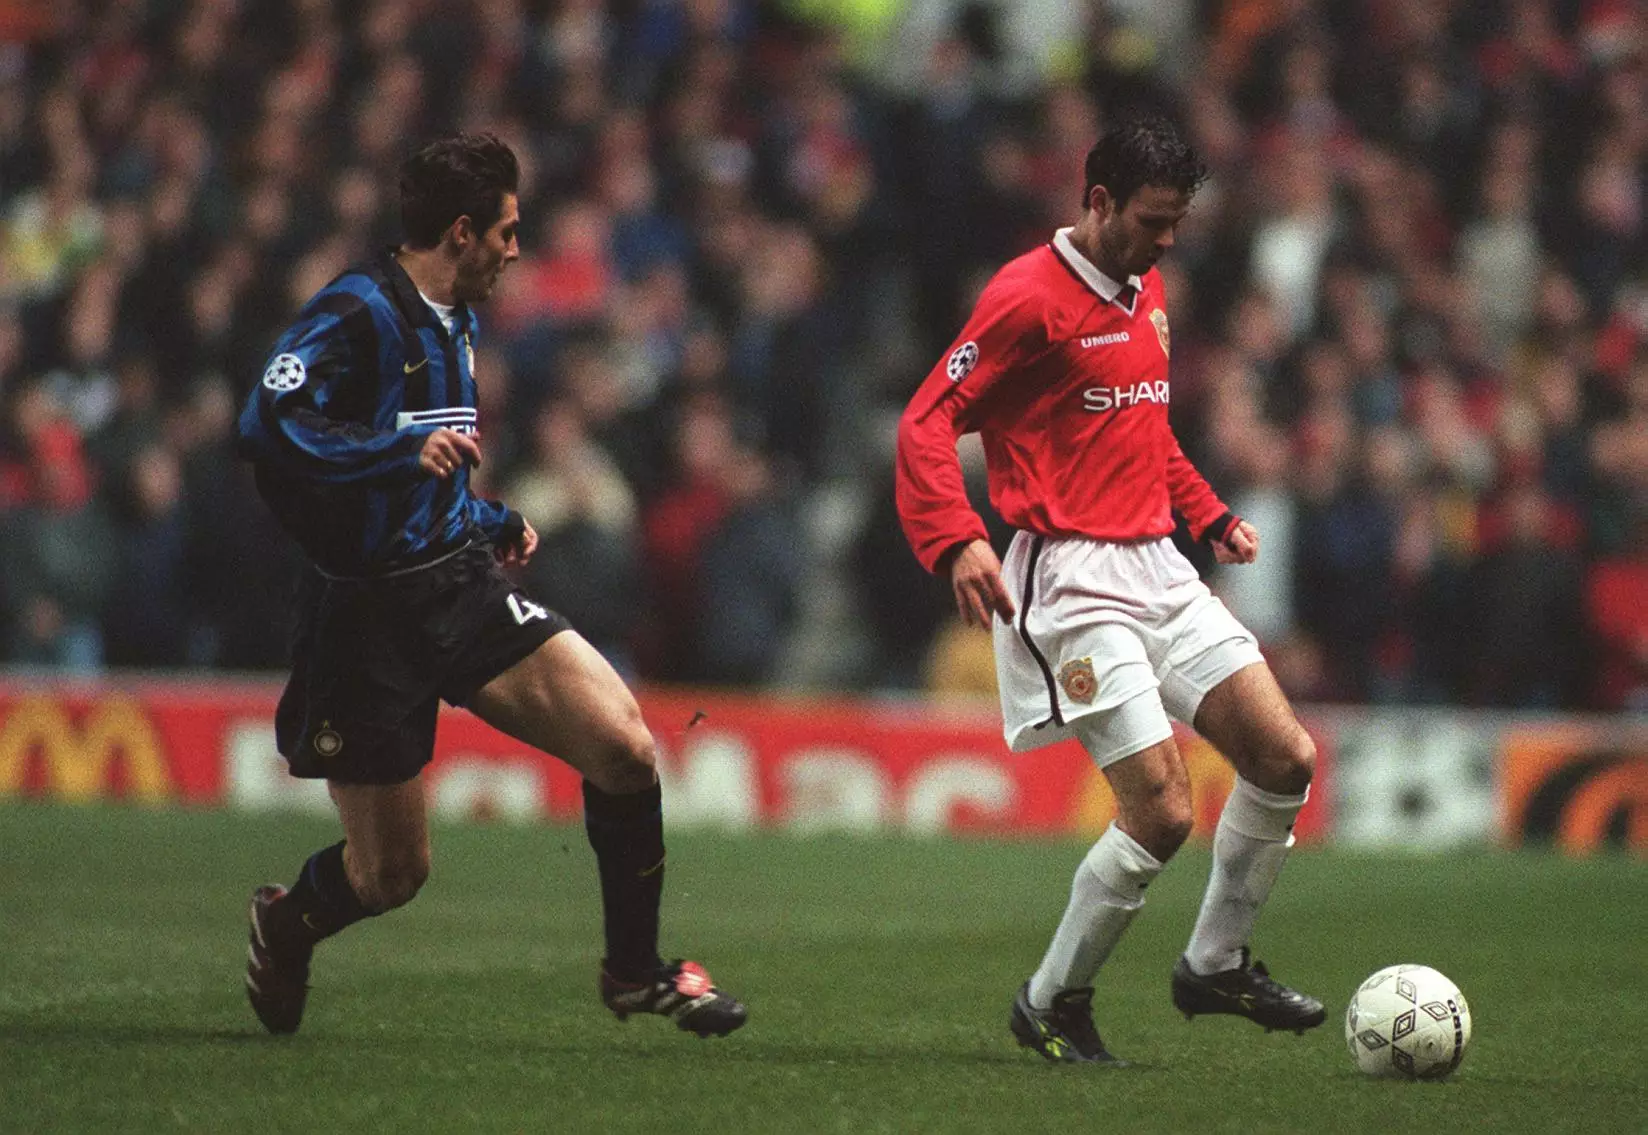 Zanetti marks Giggs in 1999. Image: PA Images